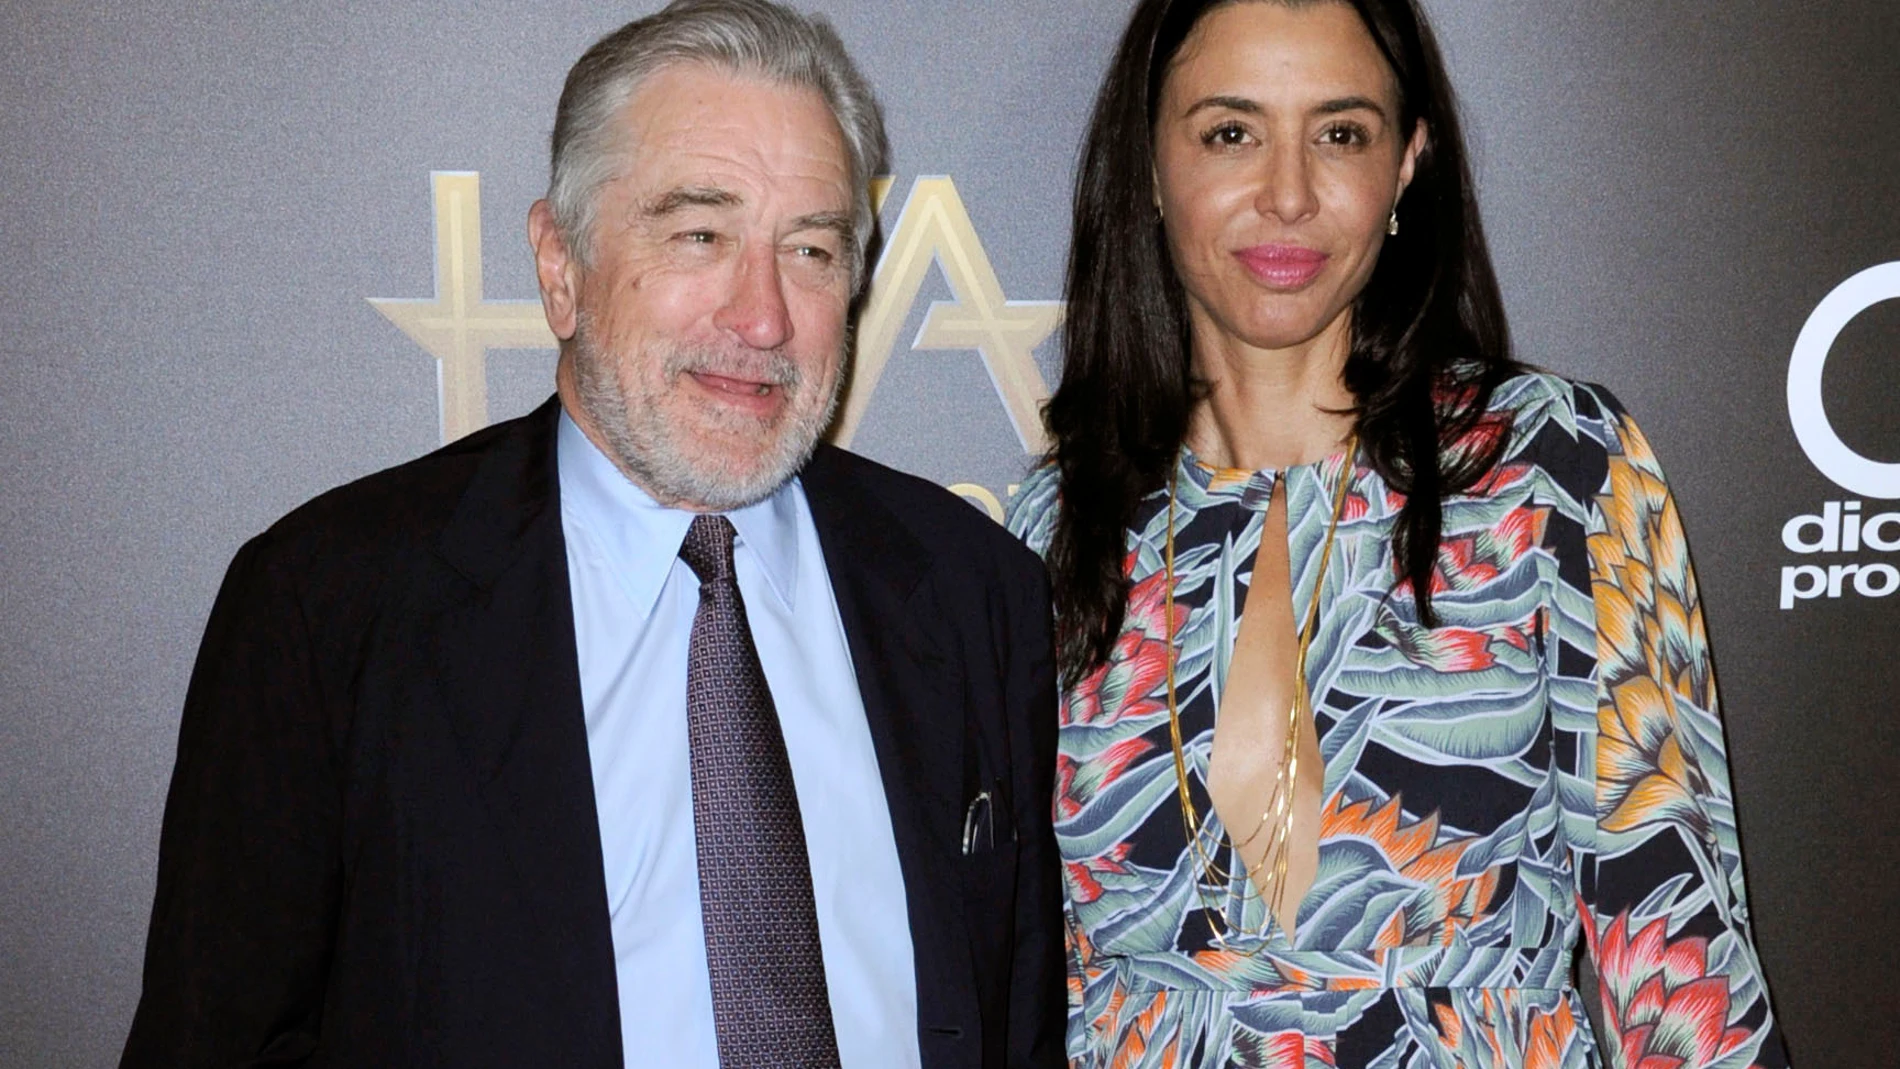 FILE - Robert De Niro, left, and his daughter Drena De Niro appear at the 20th annual Hollywood Film Awards in Beverly Hills, Calif., on Nov. 6, 2016. Leandro De Niro Rodriguez, a grandson of Robert De Niro and Diahnne Abbott, has died at 19. His mother, Drena De Niro, announced the news Monday in an Instagram post. (Photo by Richard Shotwell/Invision/AP, File)